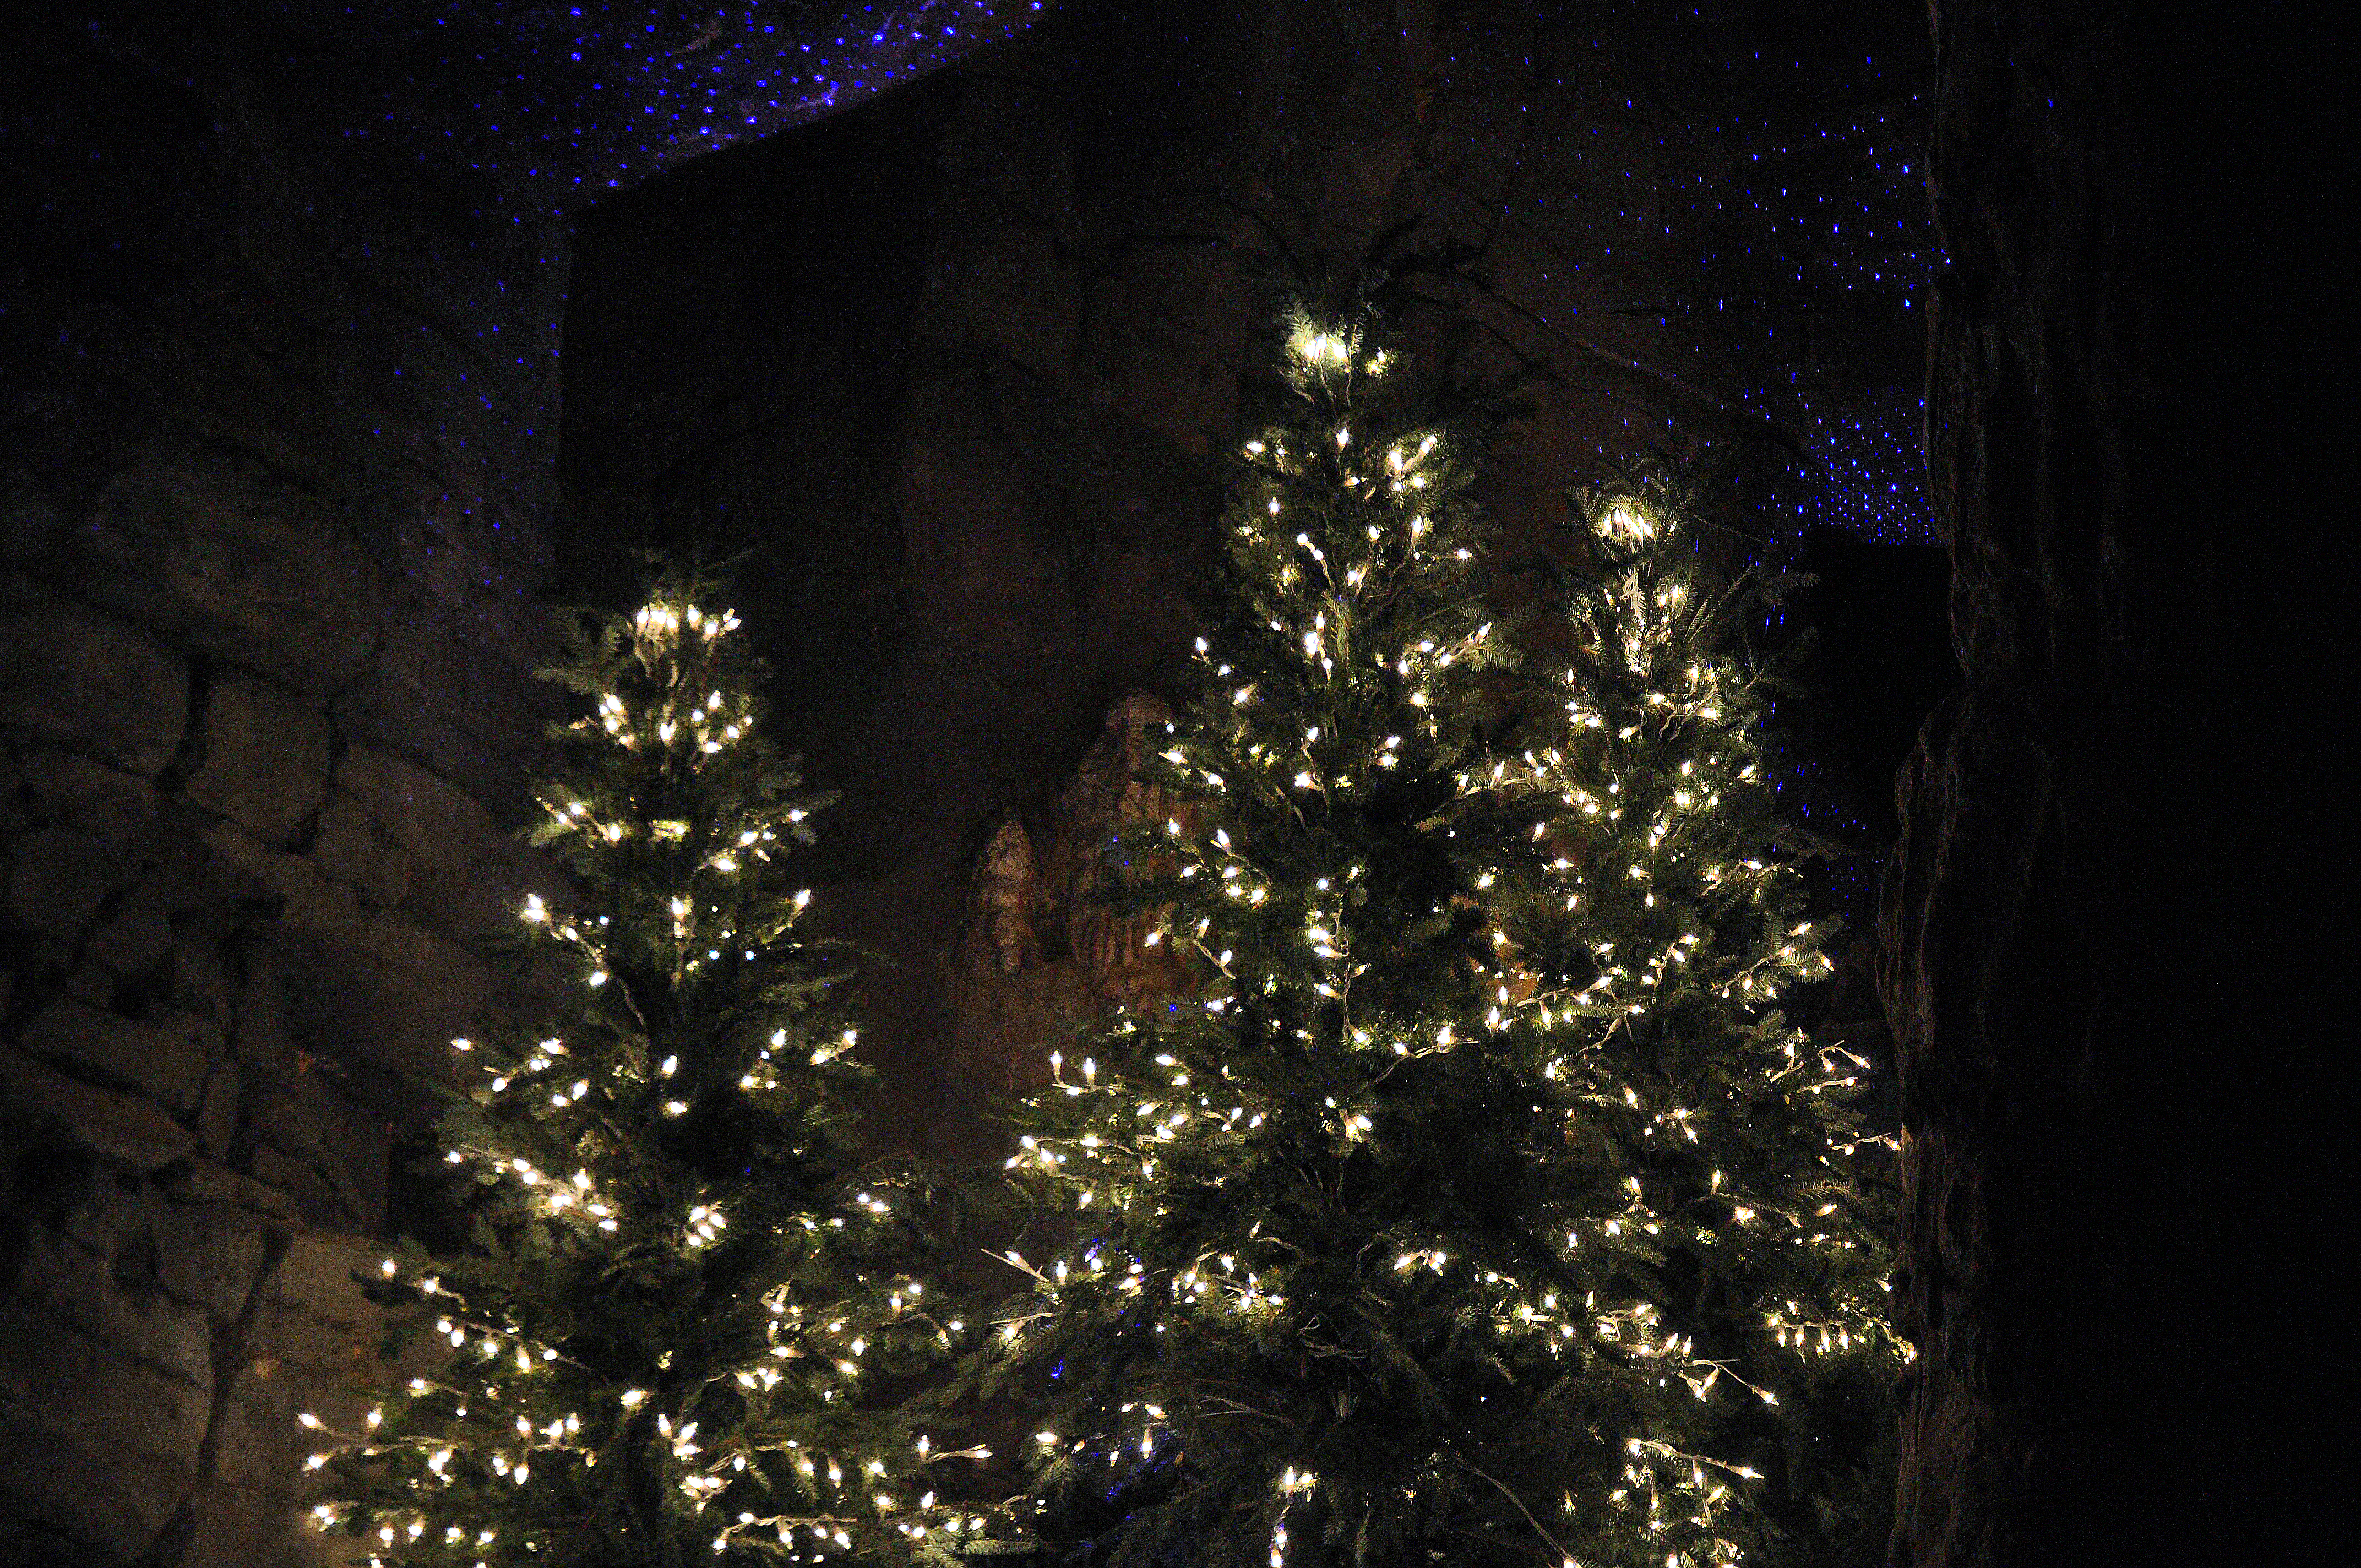 12 11 2015 - Trees and lights in cave during Winter Celebration - kkreeder